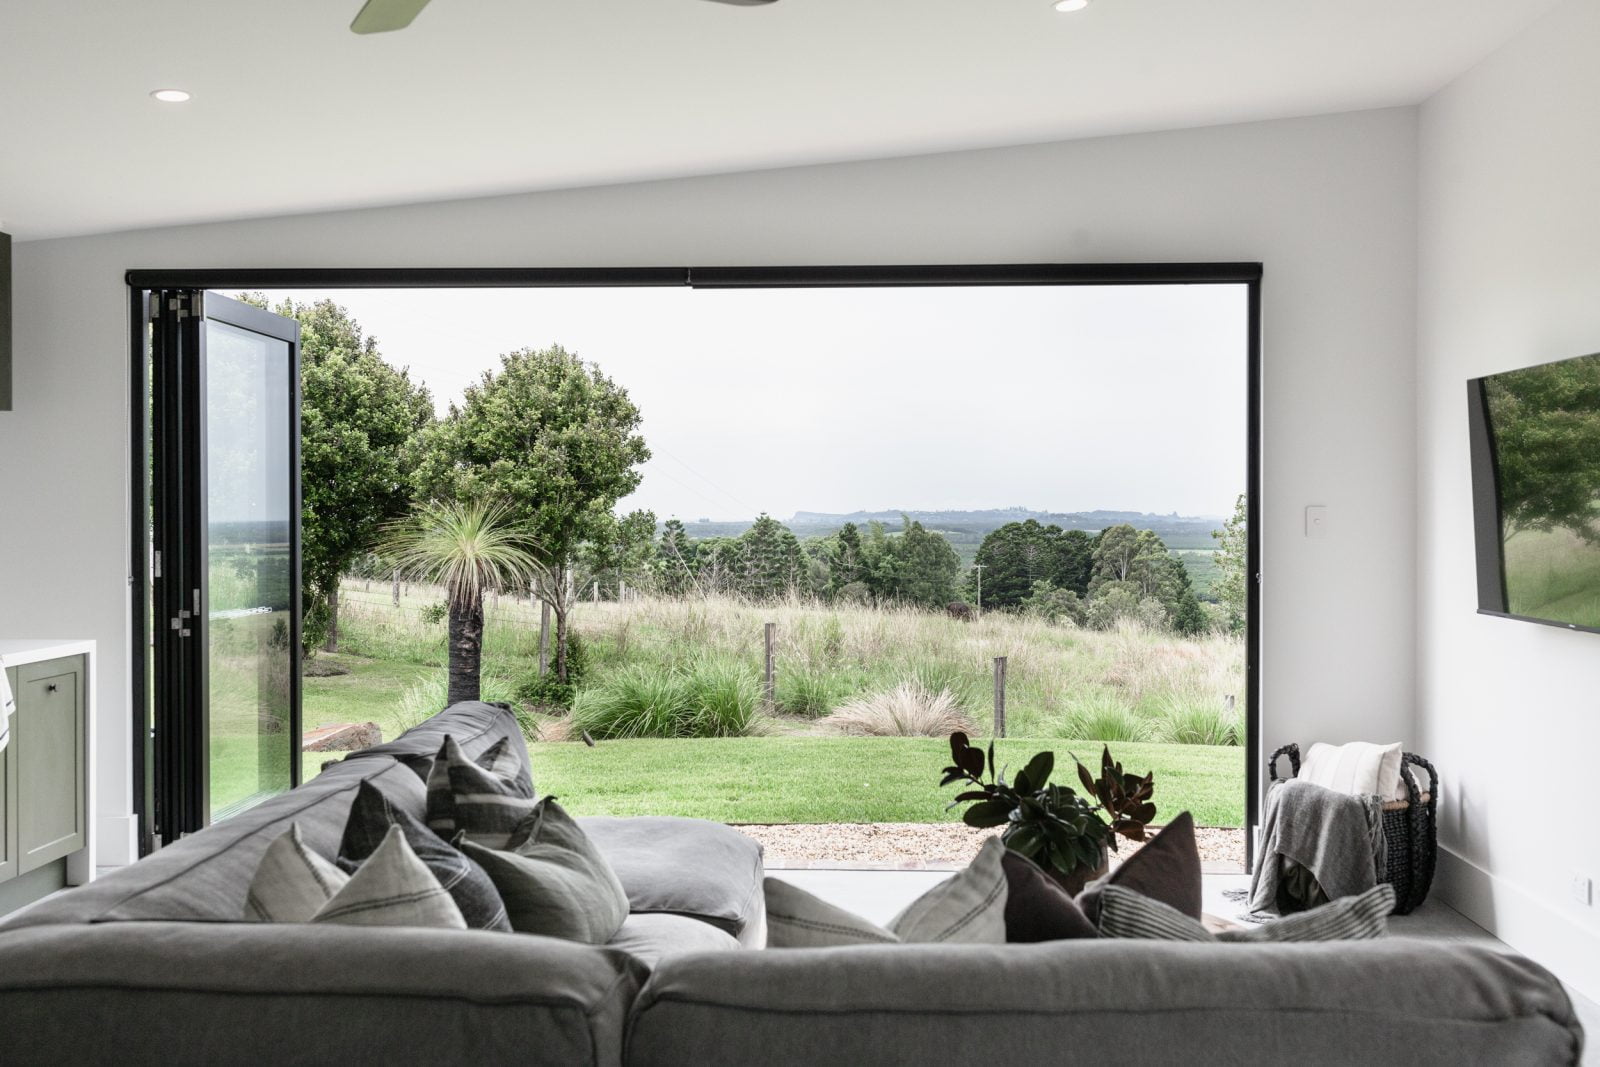 Living room with doors opened, providing a view to a natural environment